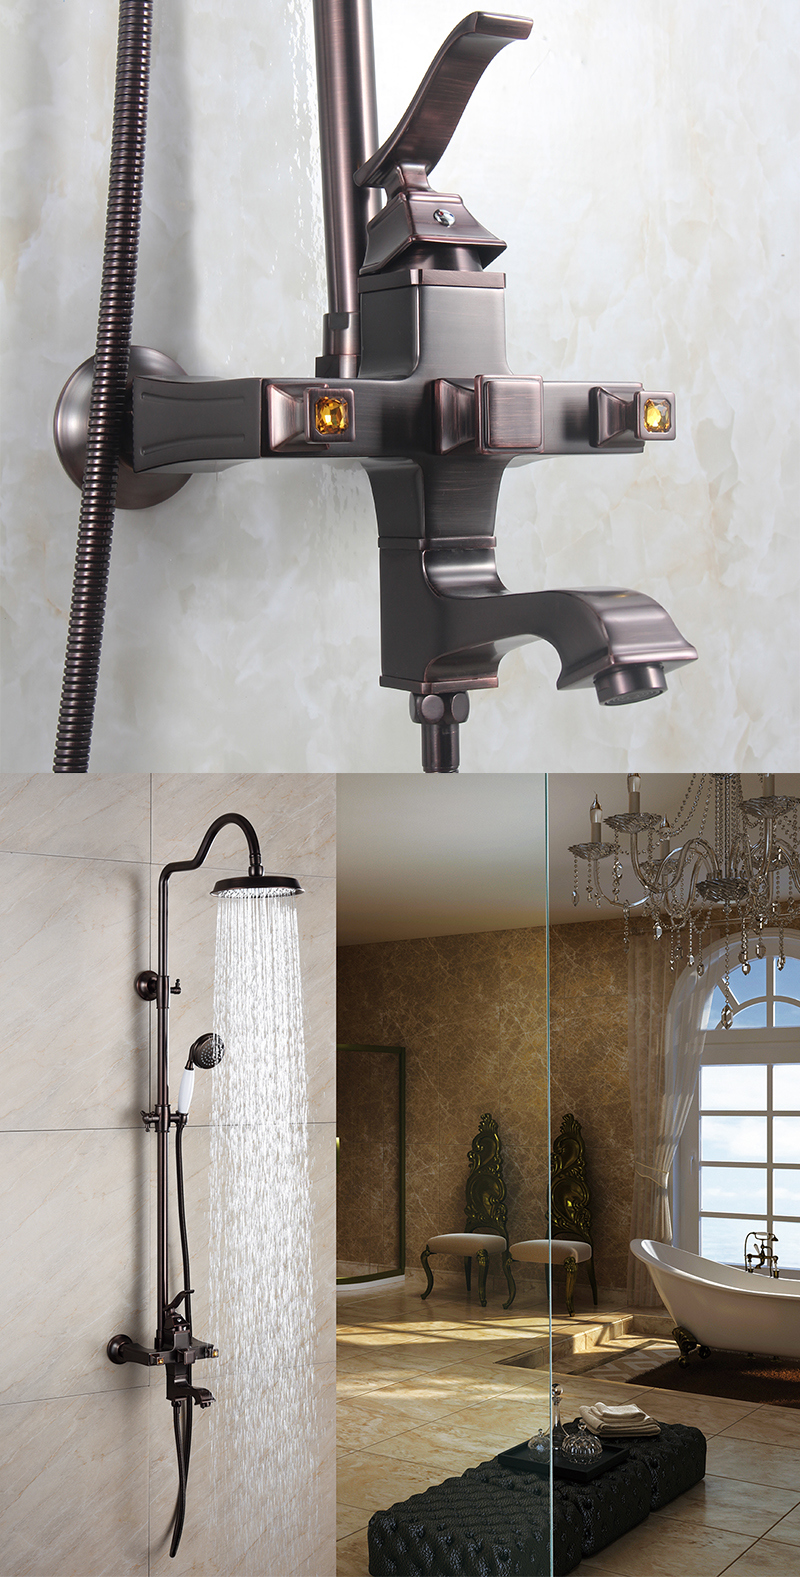 Orb Wall Mounted Rain Shower Faucet